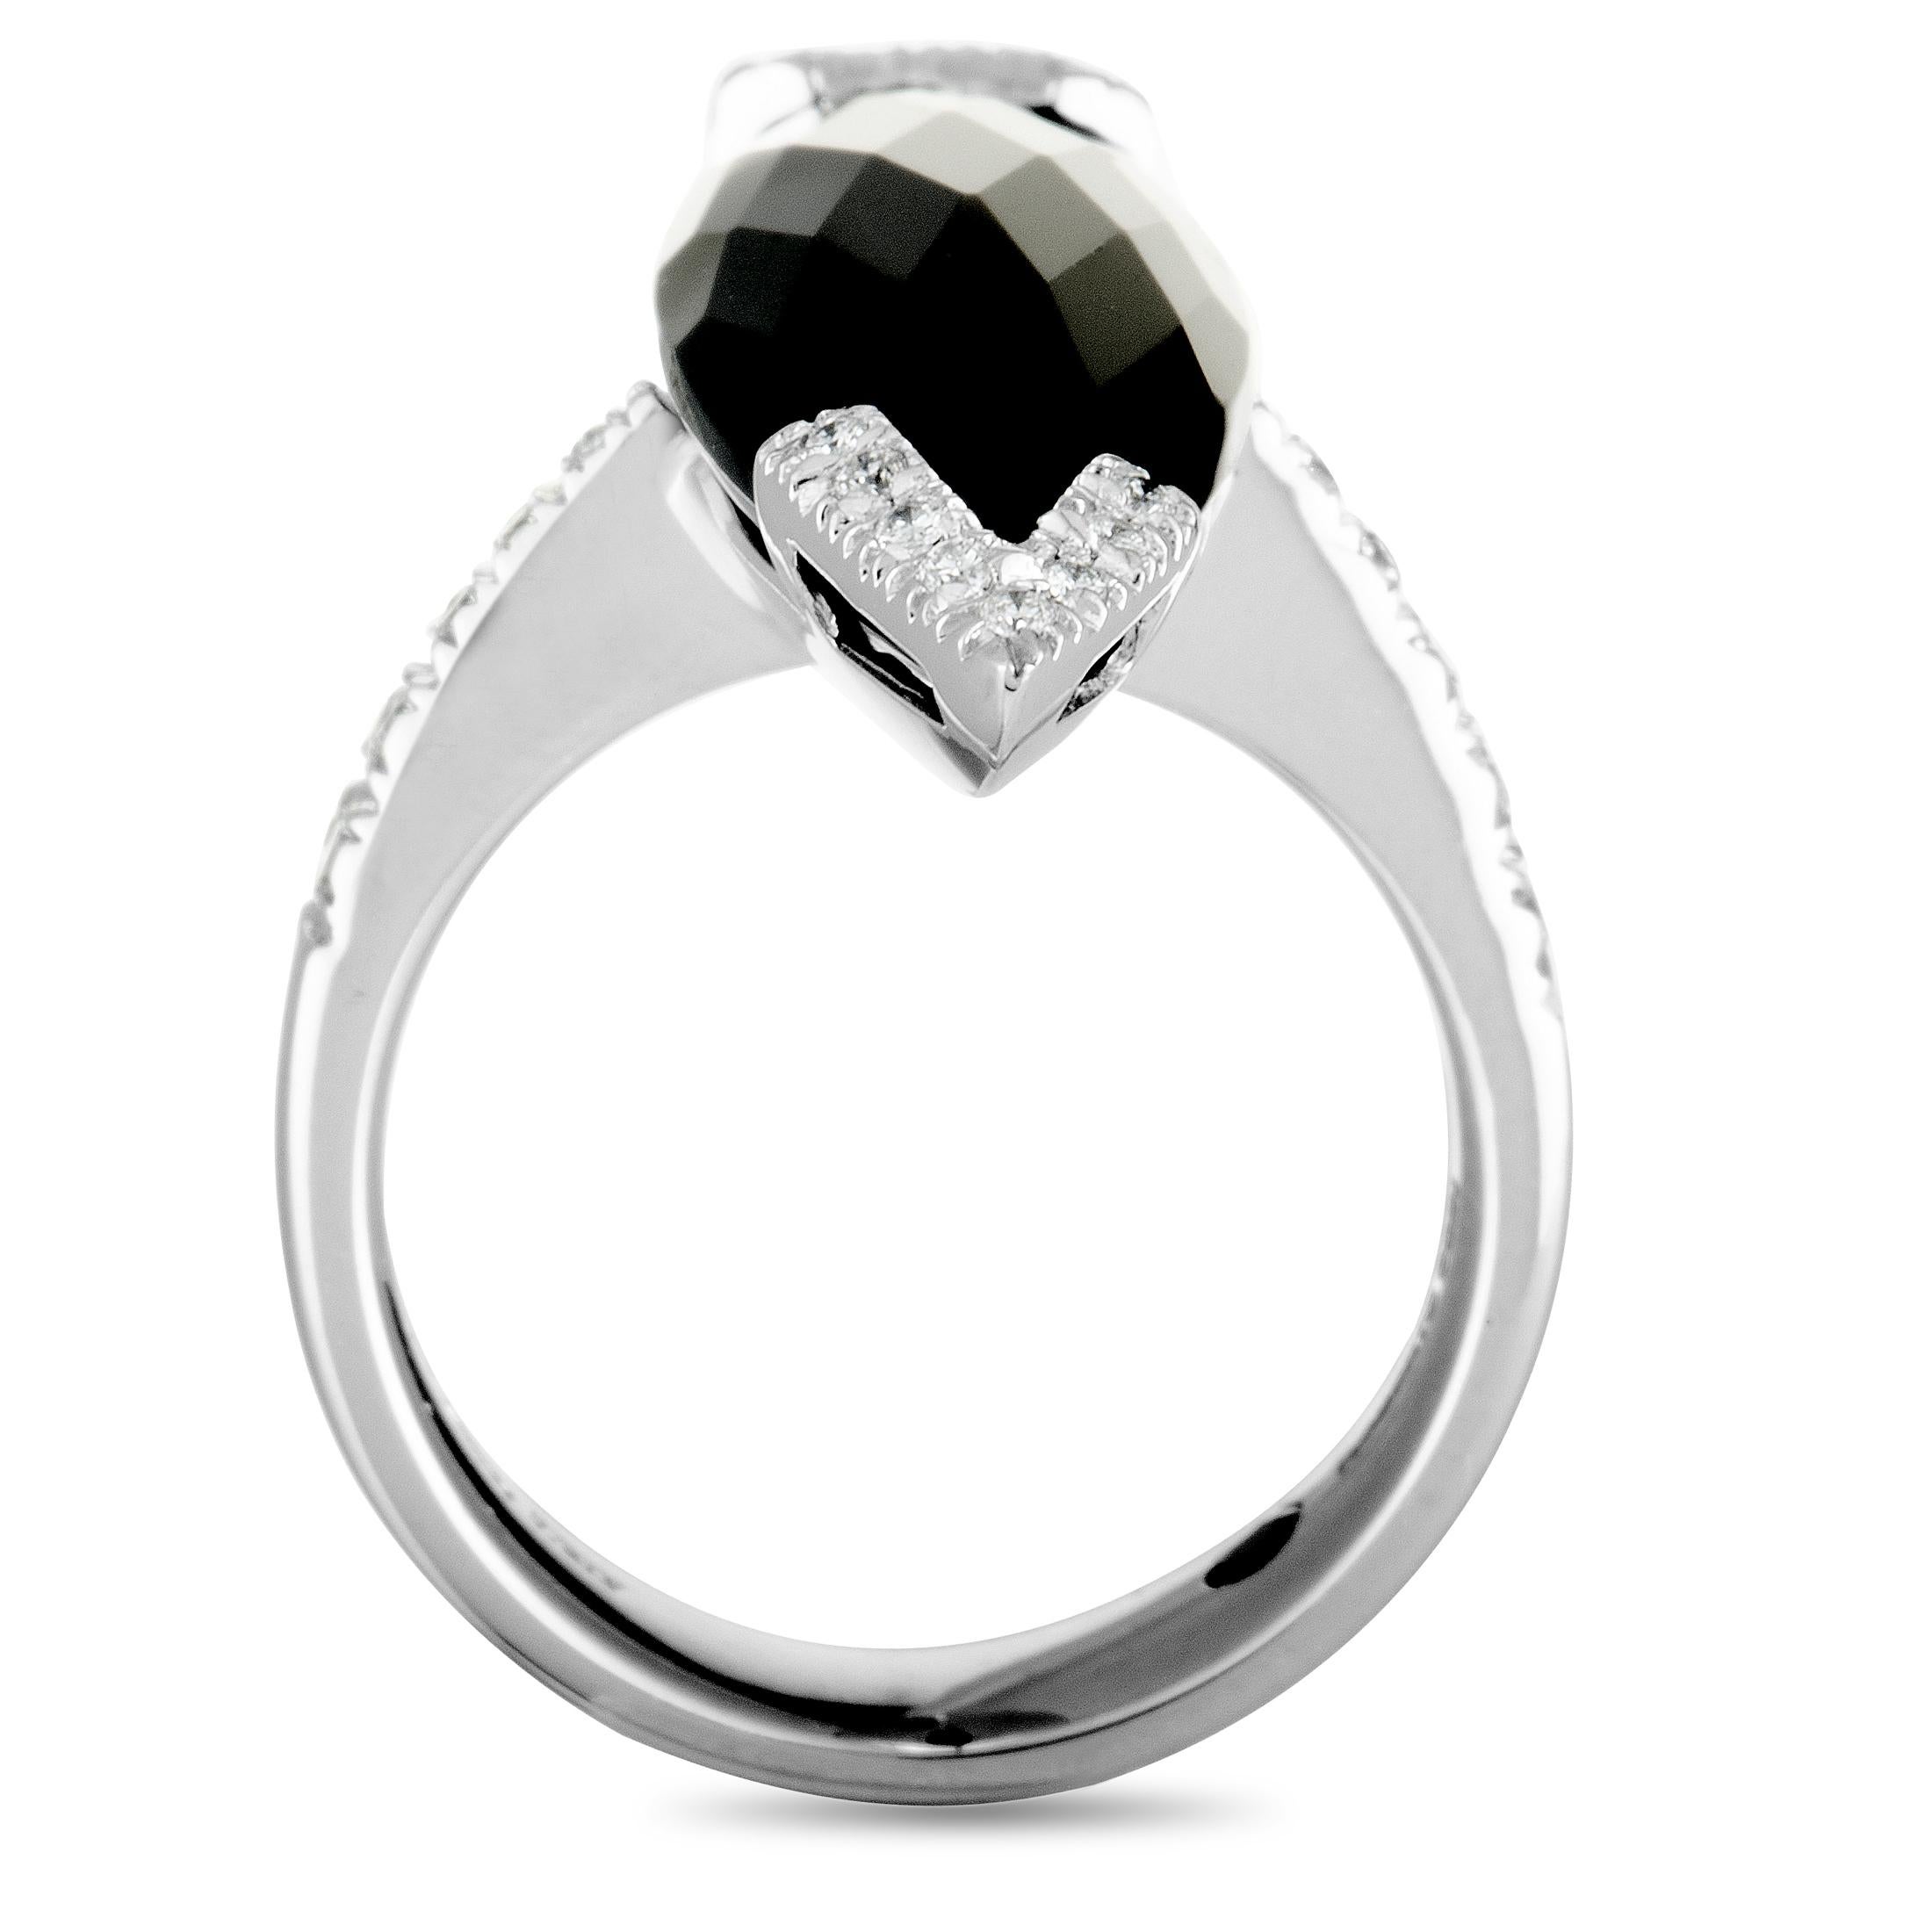 The expertly cut onyx is the star of the show in this fabulous ring from Roberto Coin that is exquisitely crafted from prestigious 18K white gold and embellished with resplendent diamond stones that amount to 0.35 carats.
 Ring Top Dimensions: 20mm